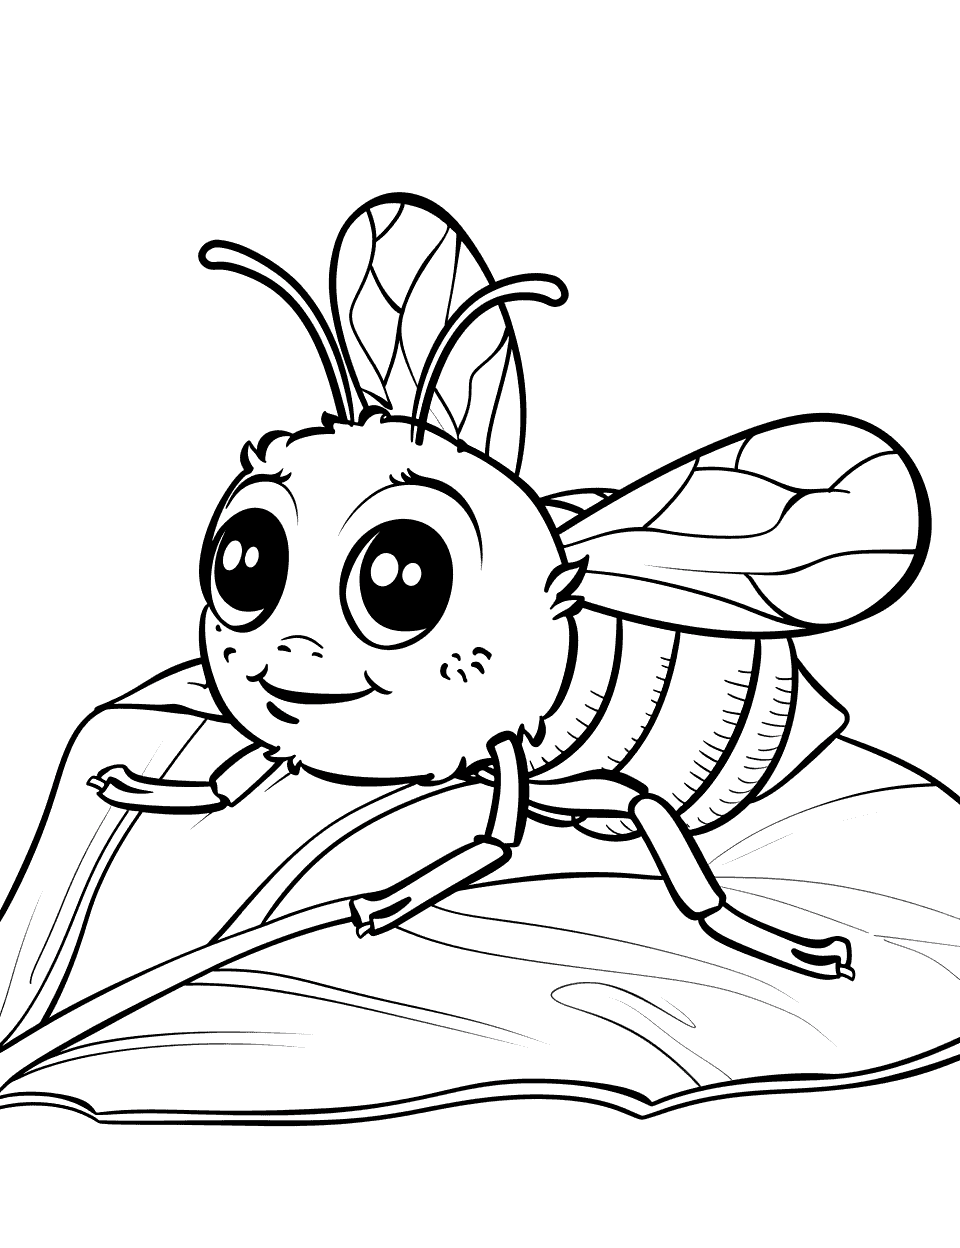 Stingless Bee on a Leaf Coloring Page - A stingless bee resting on a leaf, with a soft smile on its face.